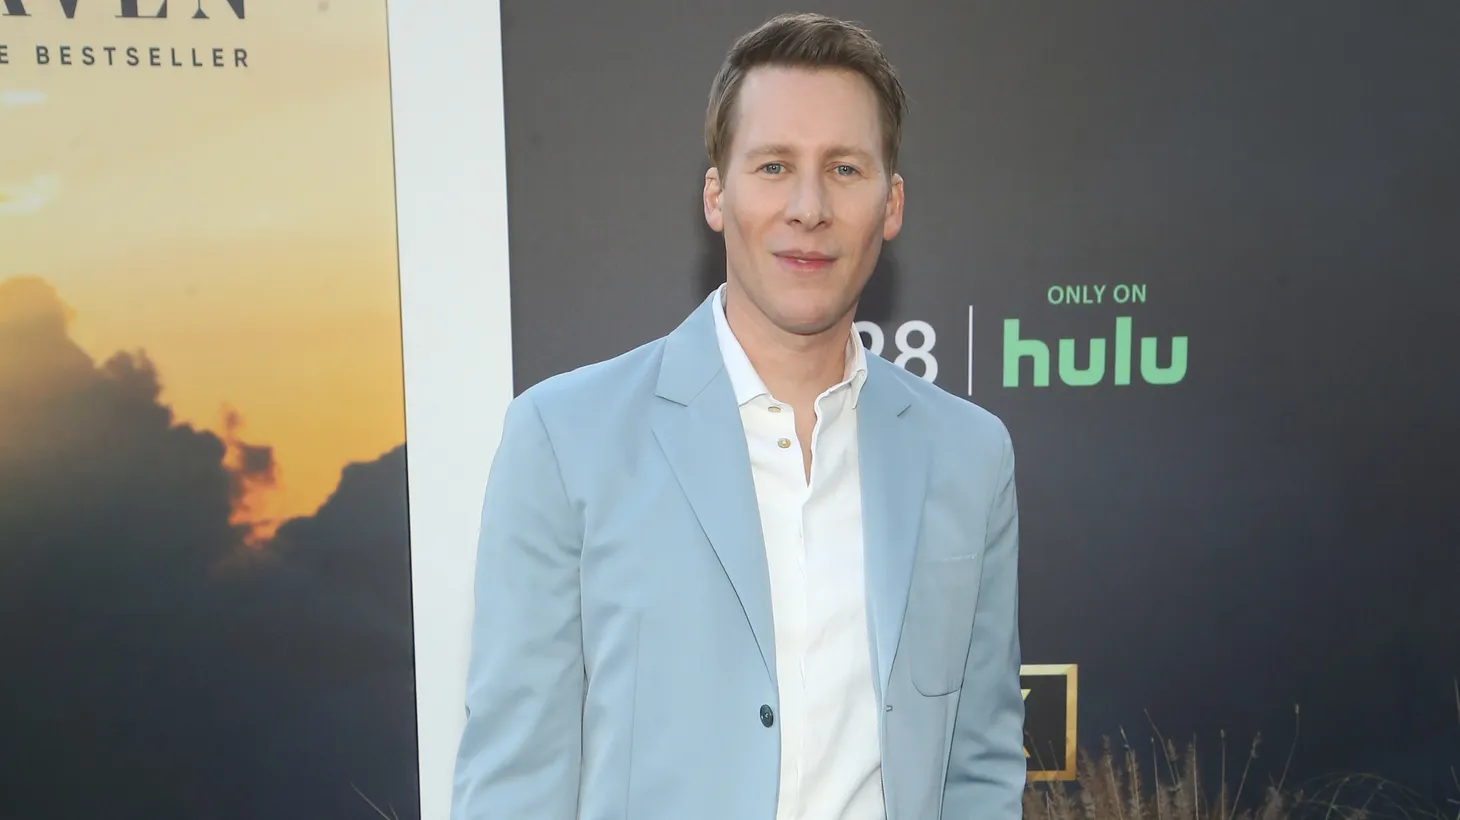 “I was six days a week in church. It was all Mormon, and it's all I knew. So leaving the church was not something I wanted to do,” Dustin Lance Black says. Black attends the premiere of FX's 'Under The Banner Of Heaven' at Hollywood Athletic Club on April 20, 2022.